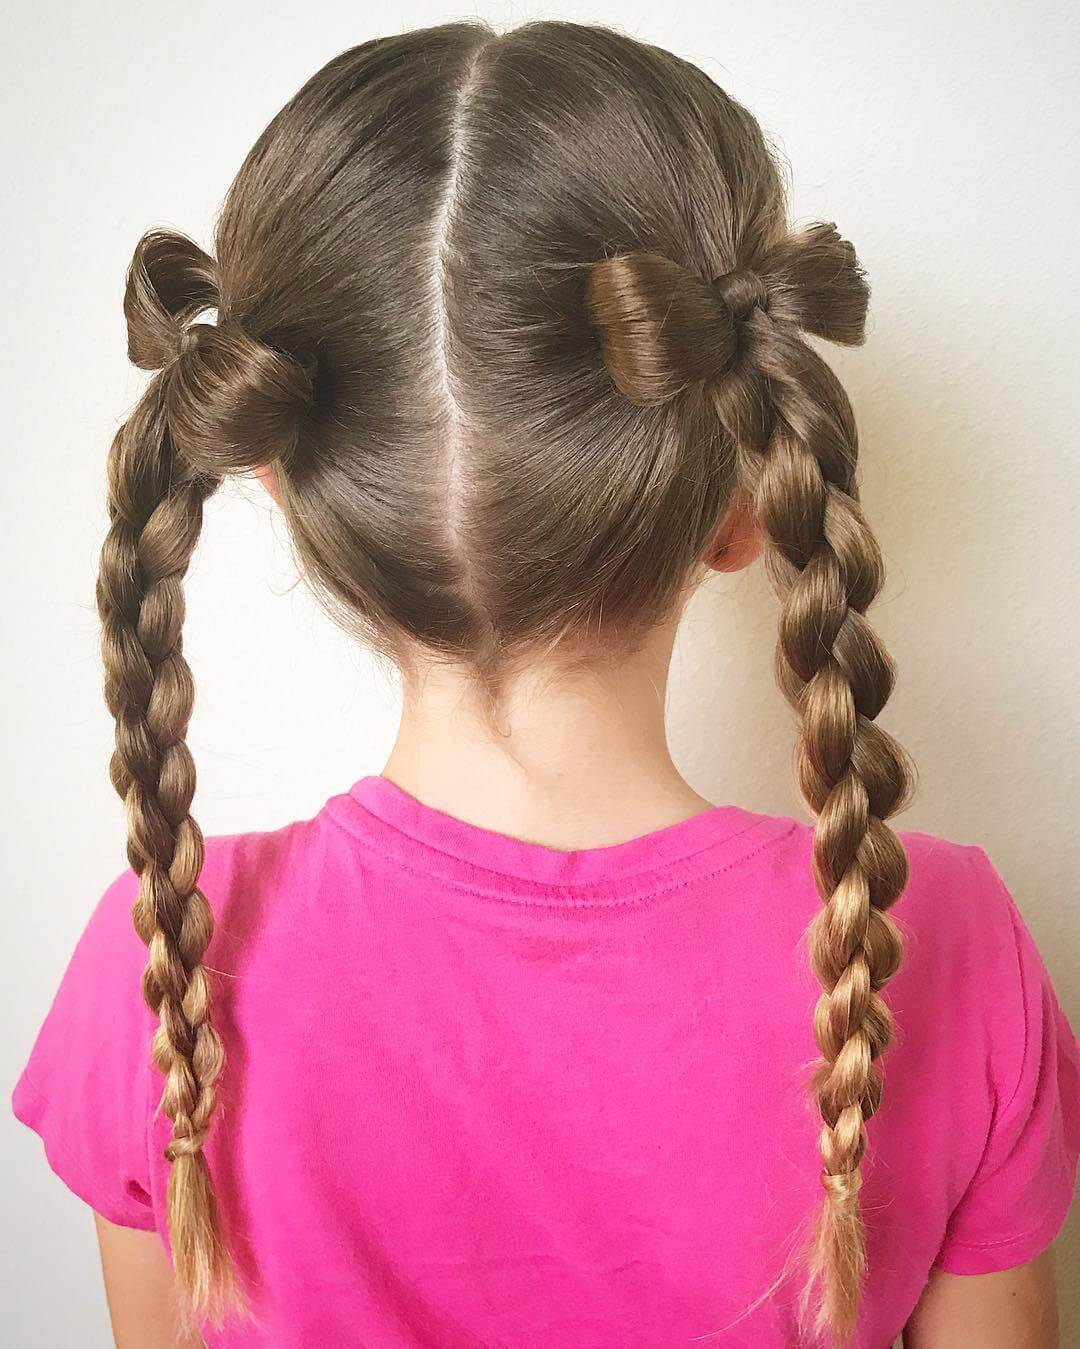 bow-tie-hairstyle-for-girls-10 - K4 Fashion